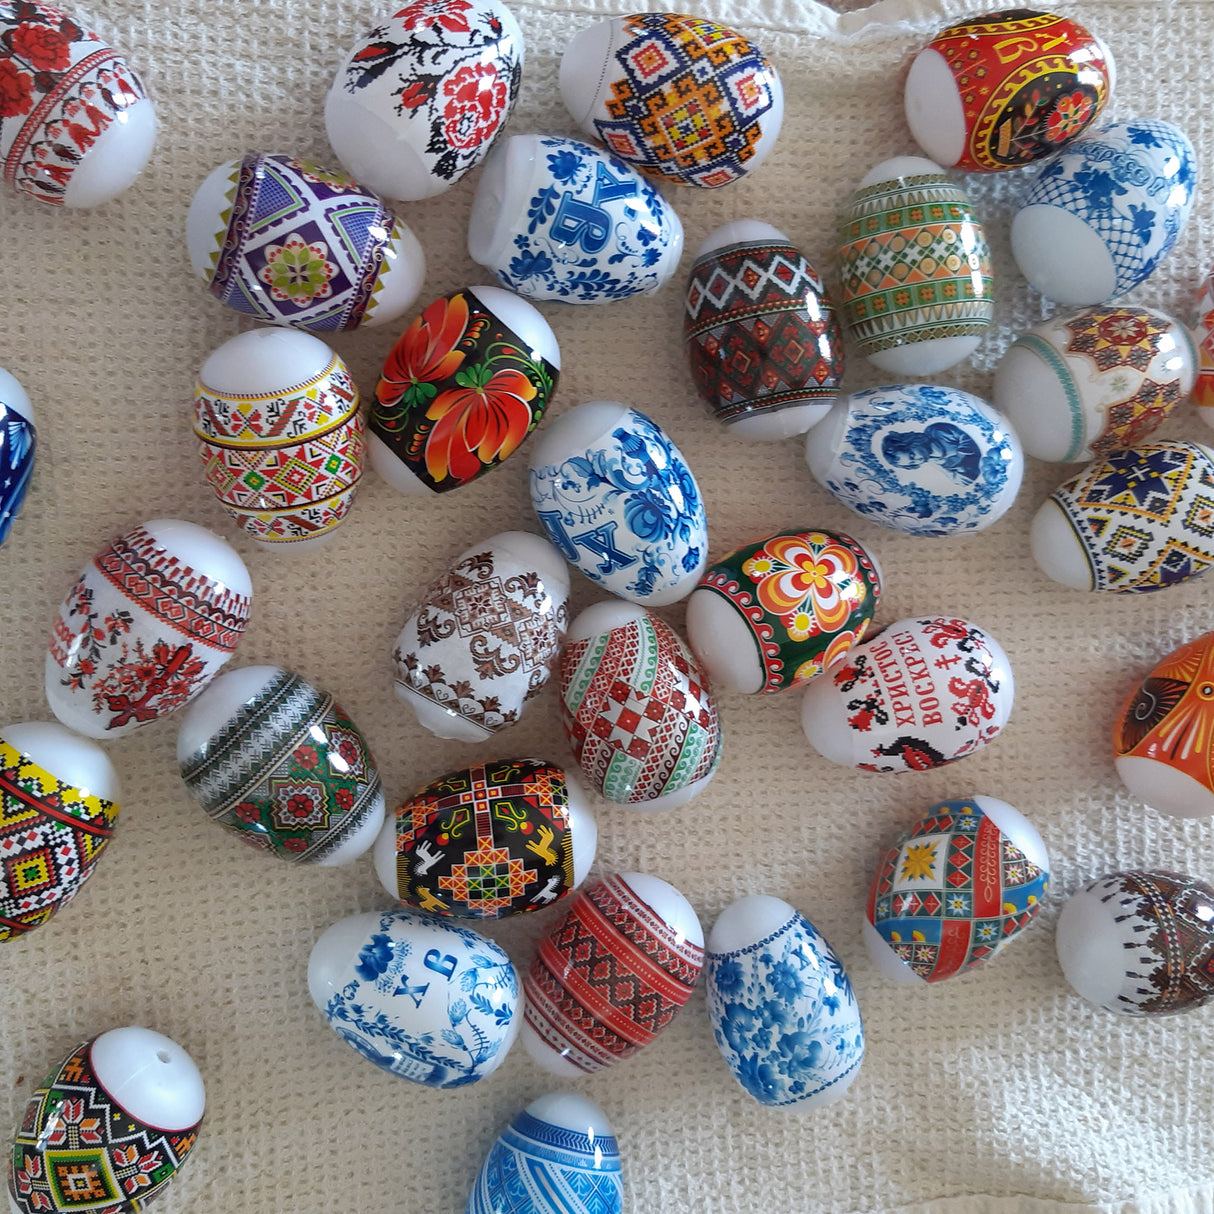 7 Oriental Style Bright Flowers Easter Egg Decorating WrapsUkraine ,dimensions in inches: 5.5 x 3.4 x 0.01